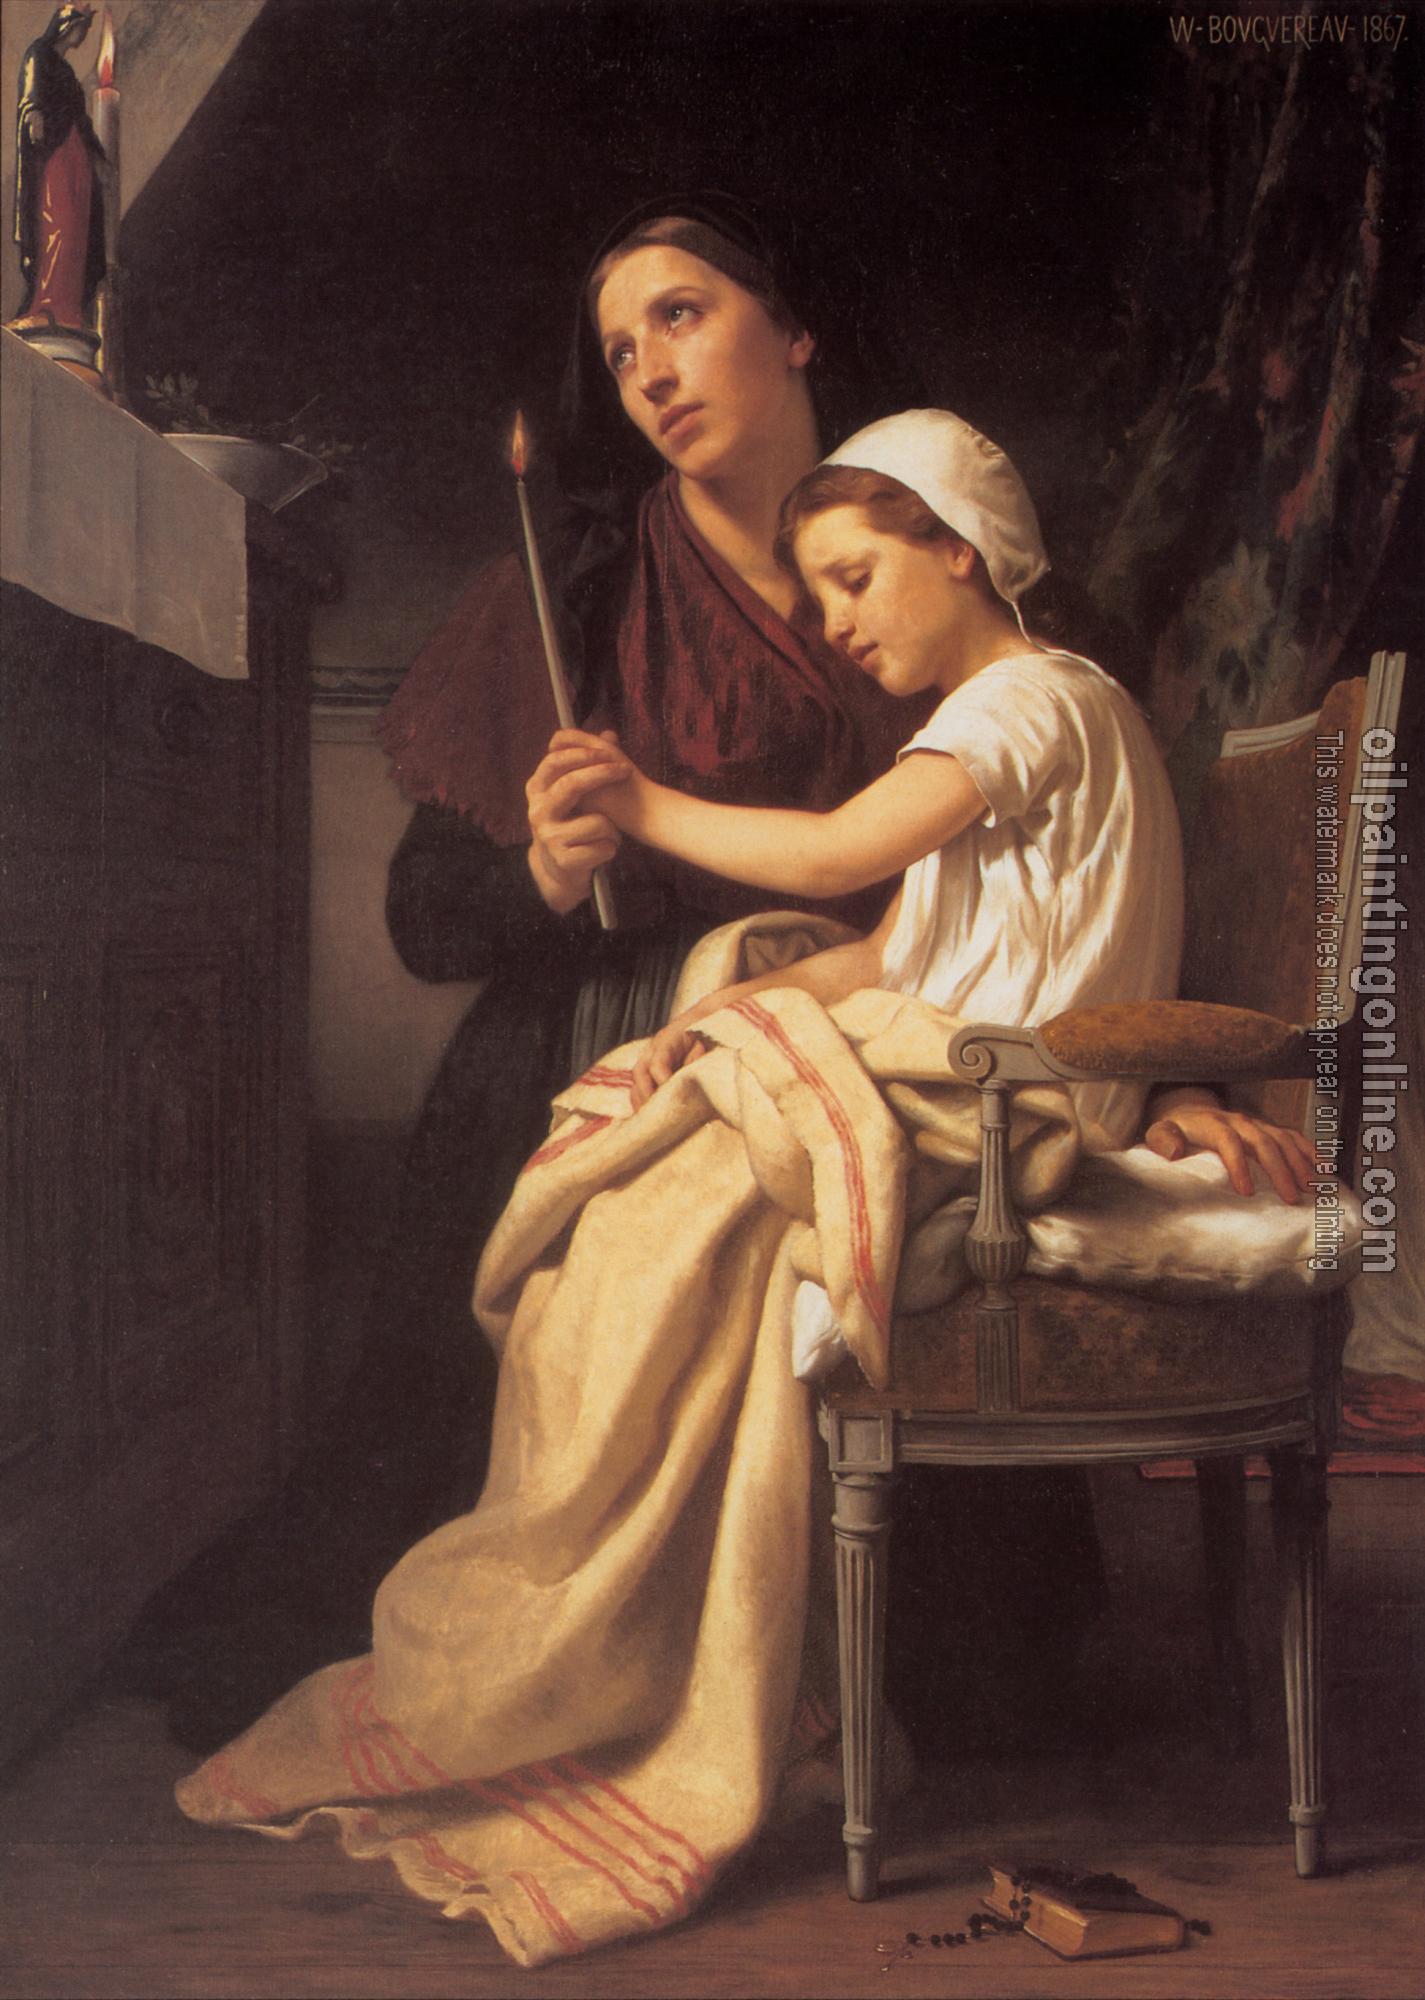 Bouguereau, William-Adolphe - The Thanks Offering